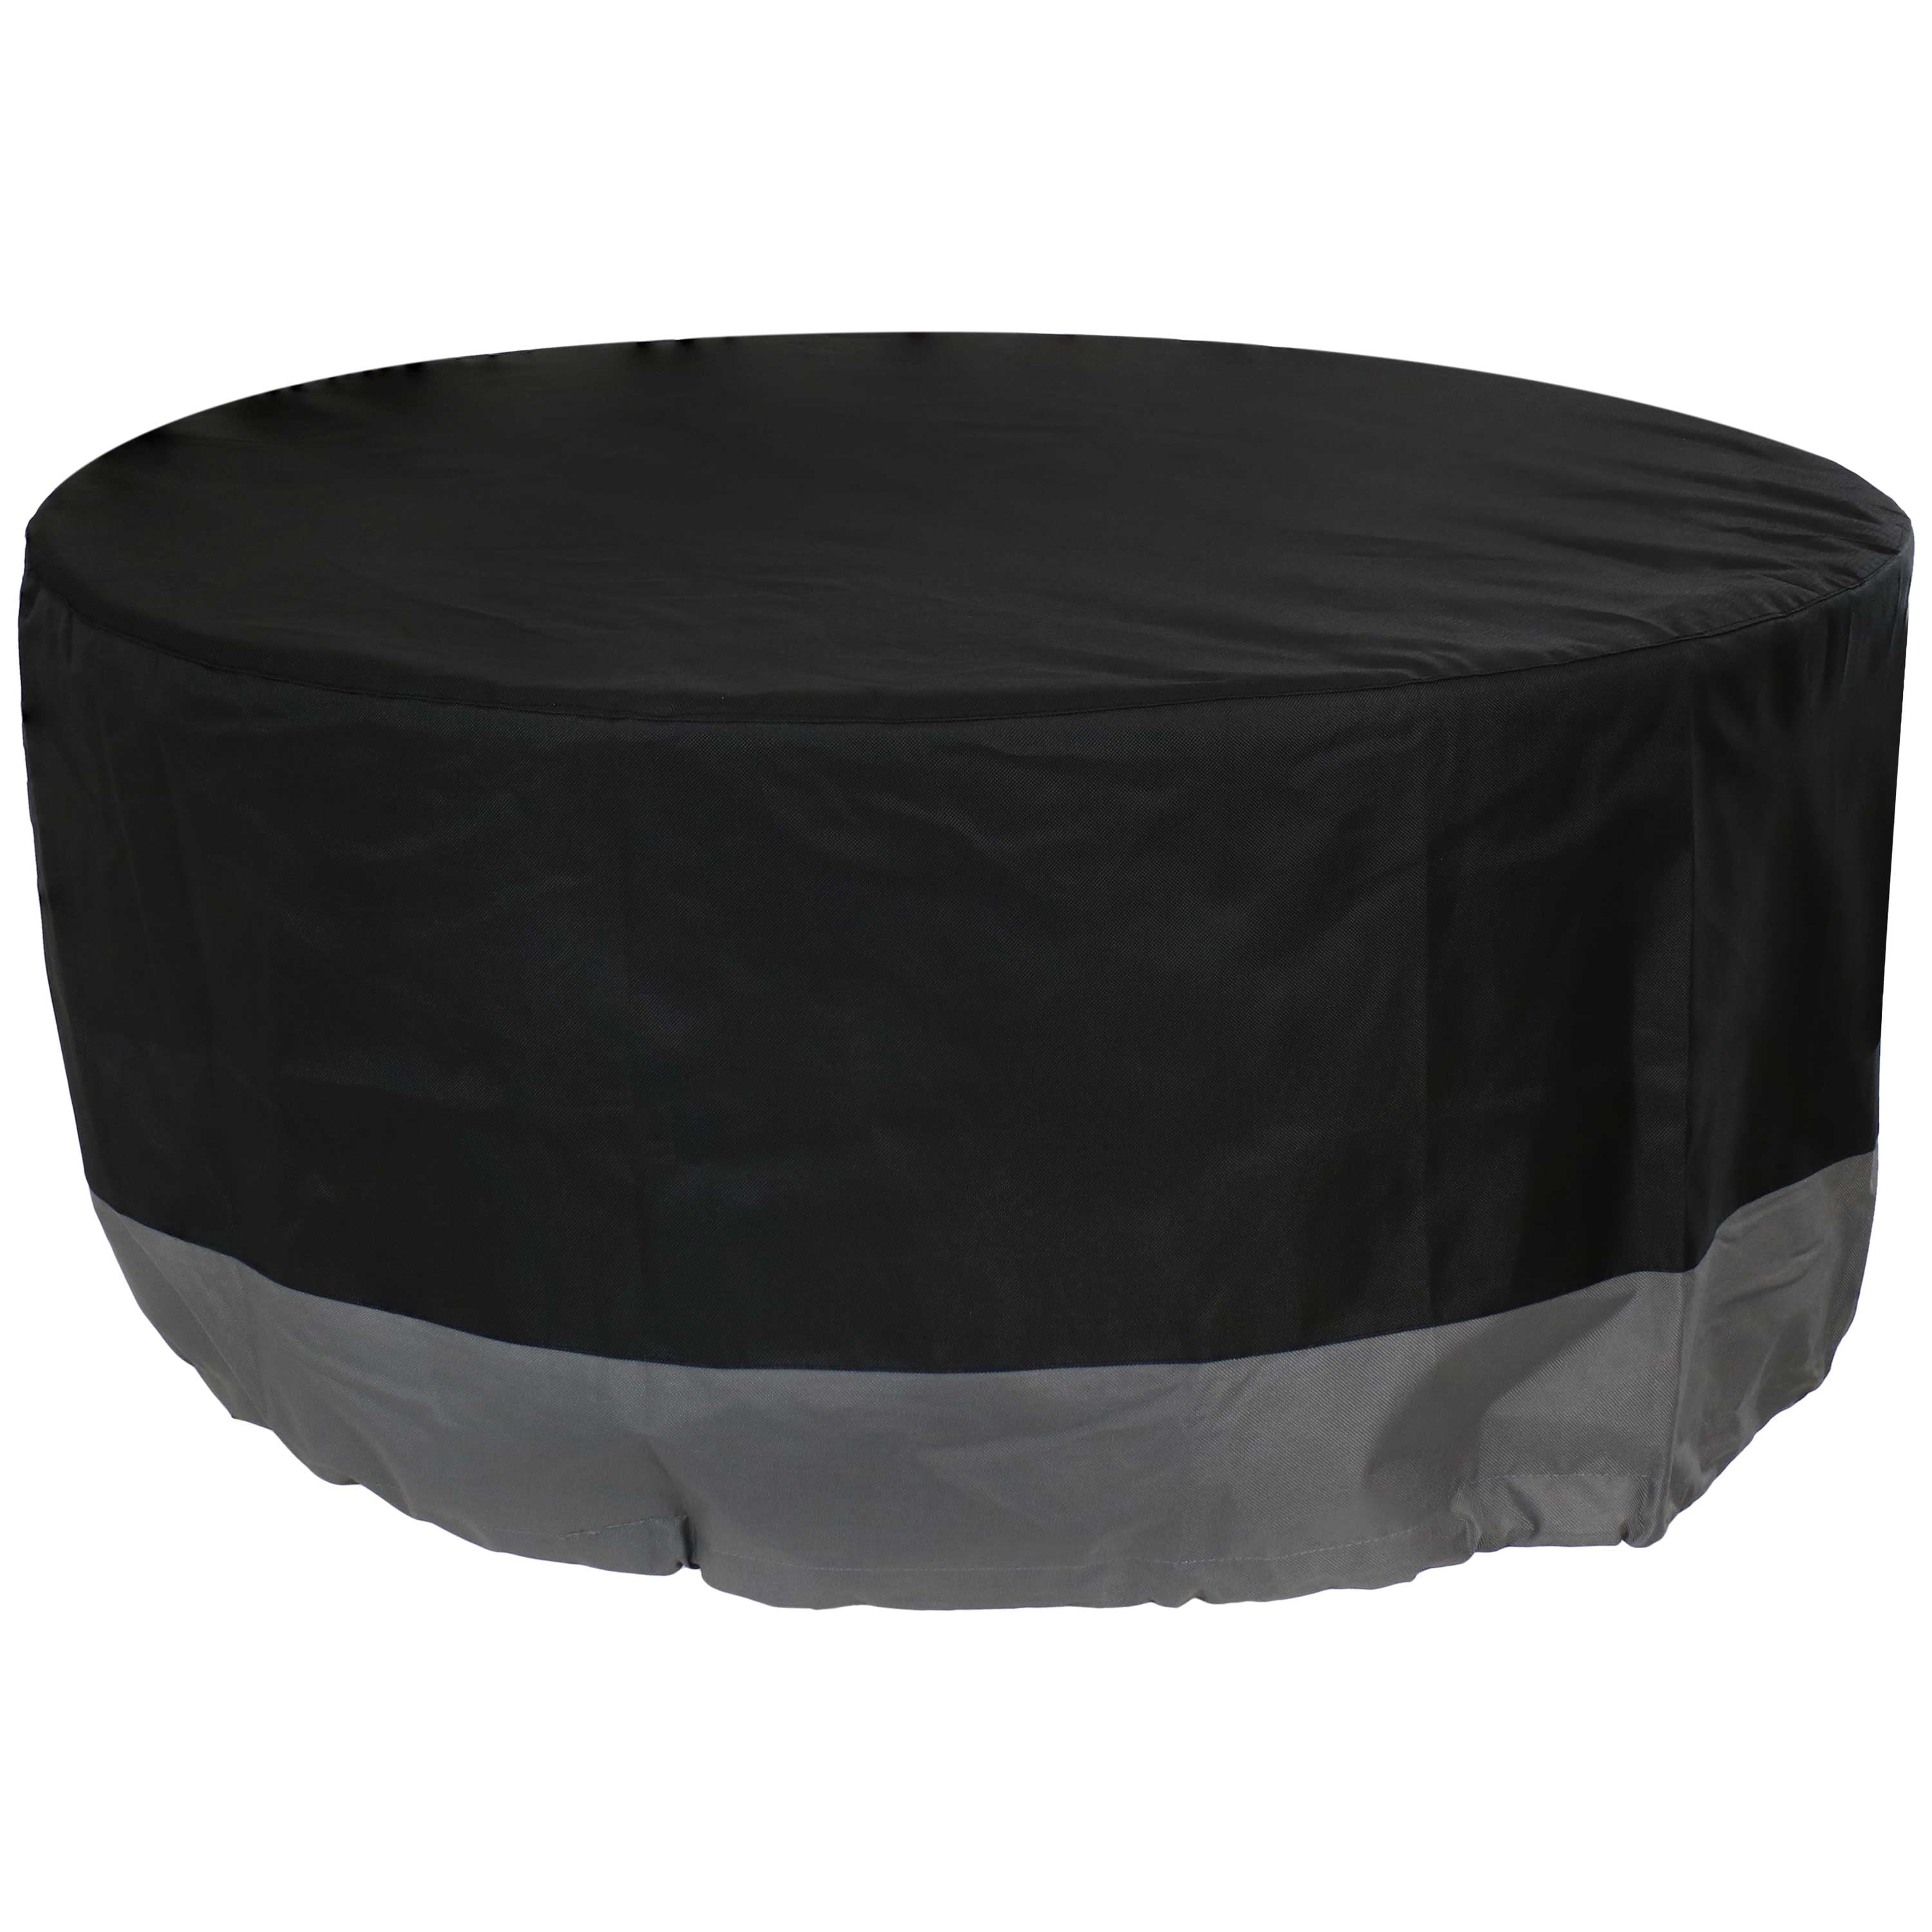 Waterproof and UV-Resistant Gray/Black 40-Inch x 18-Inch Sunnydaze Round 2-Tone Outdoor Fire Pit Cover Heavy Duty 300D Polyester Exterior Circular Winter Cover for Fire Pit